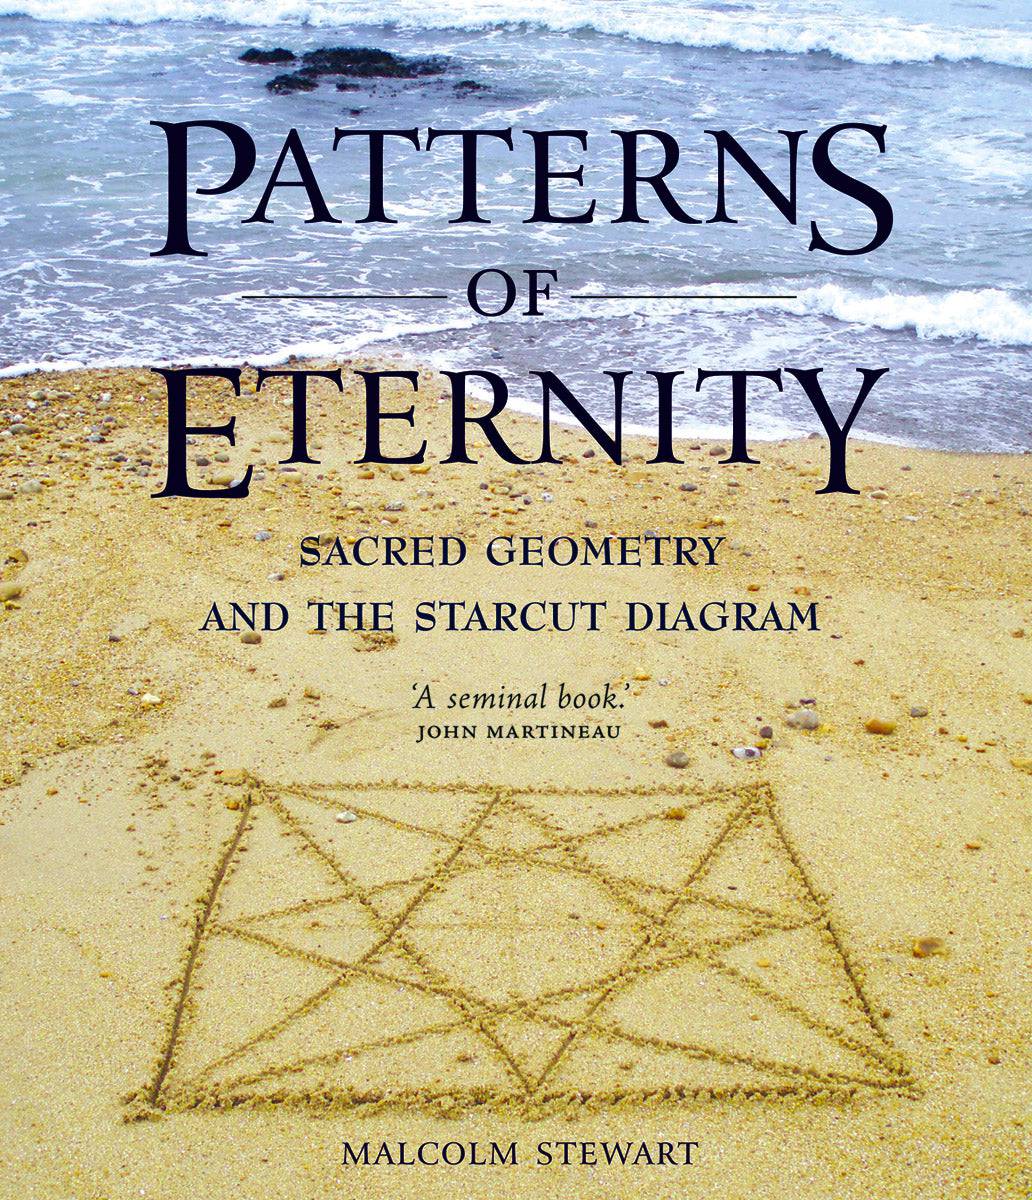 Patterns of Eternity: Sacred Geometry and the Starcut Diagram by Malcolm Stewart - The Josephine Porter Institute